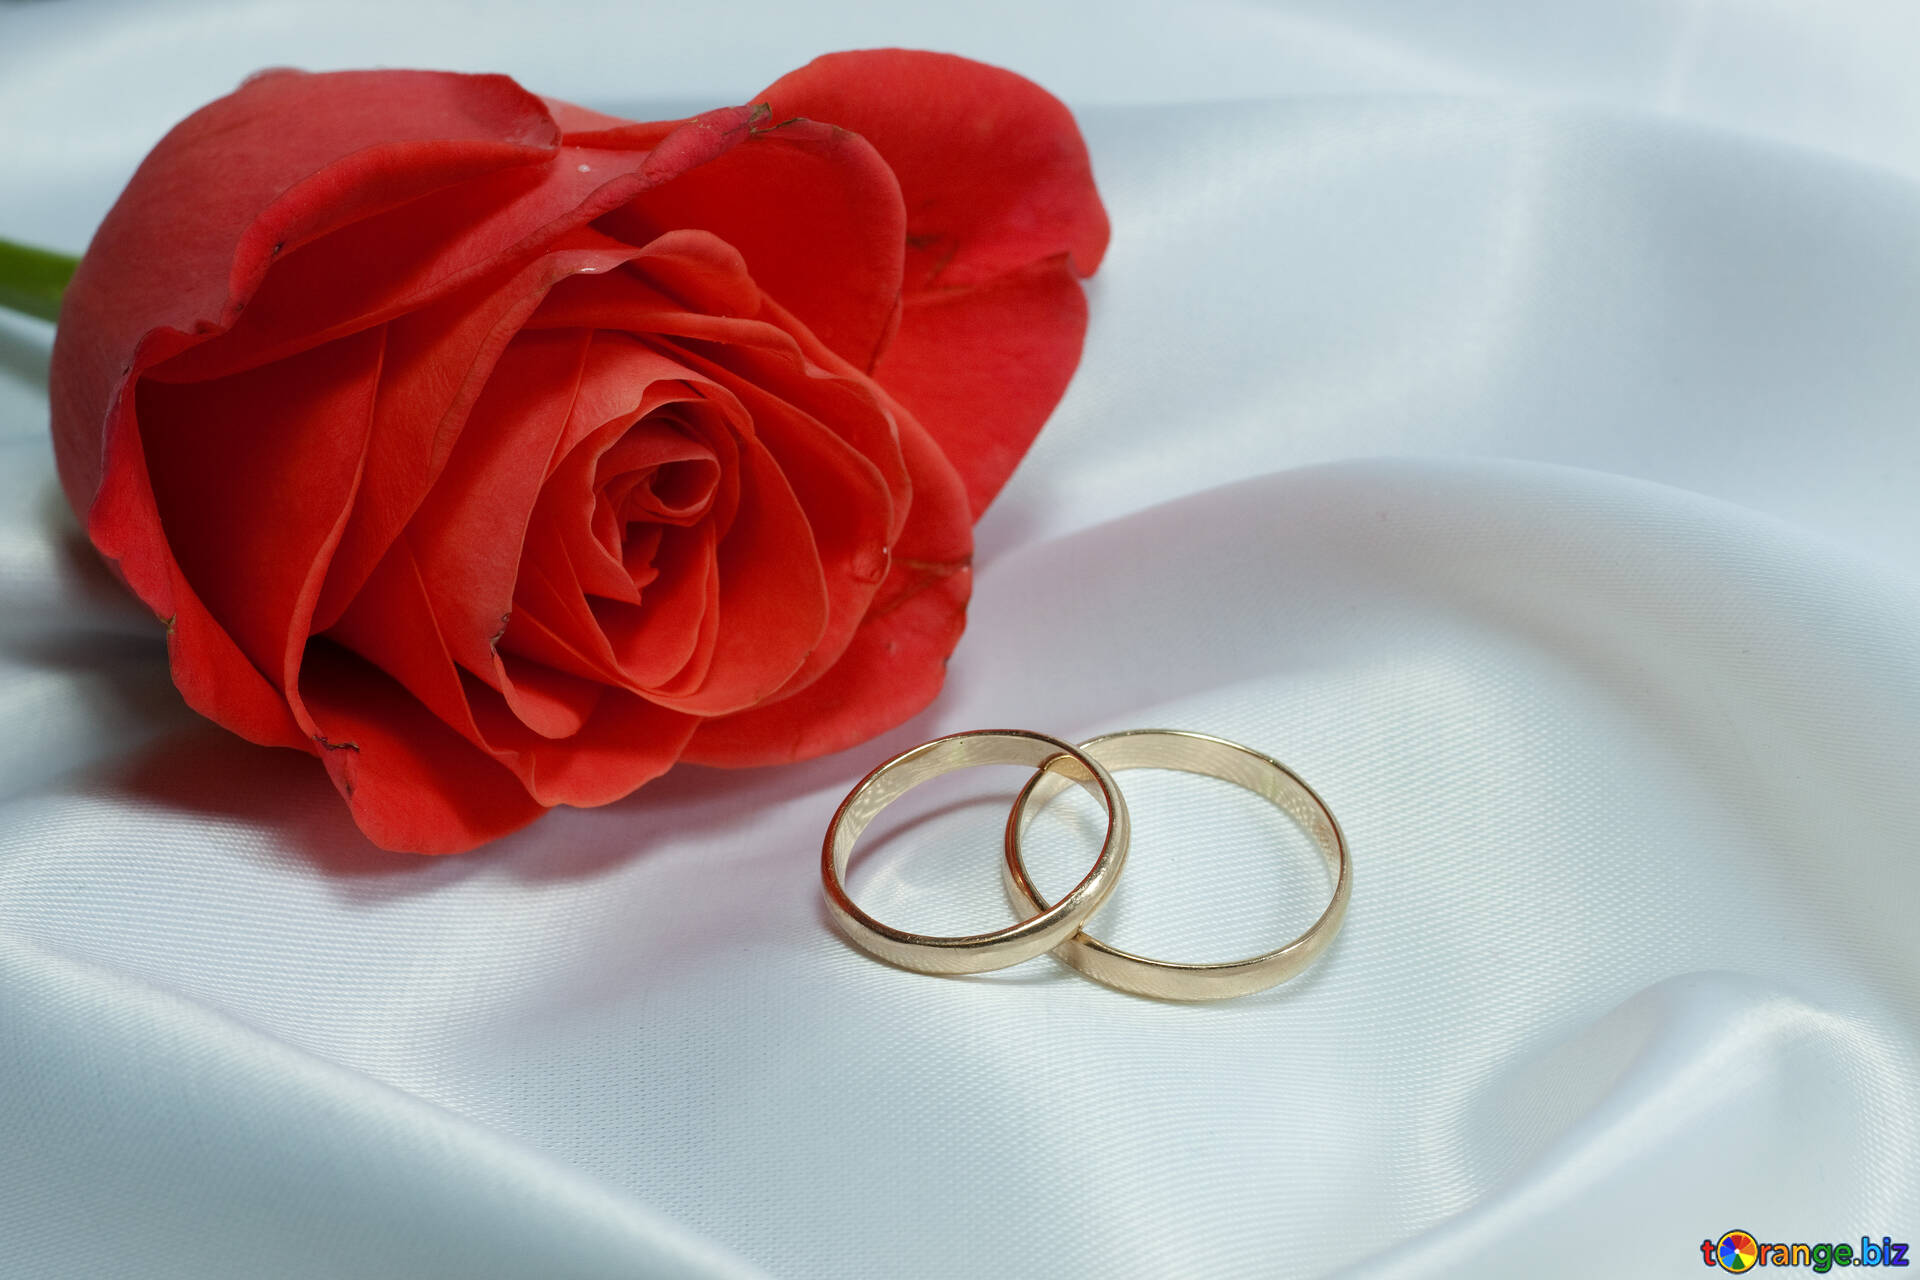 Flowers and rings image rosa and engagement rings. images ring № 7220 |   ~ free pics on cc-by license